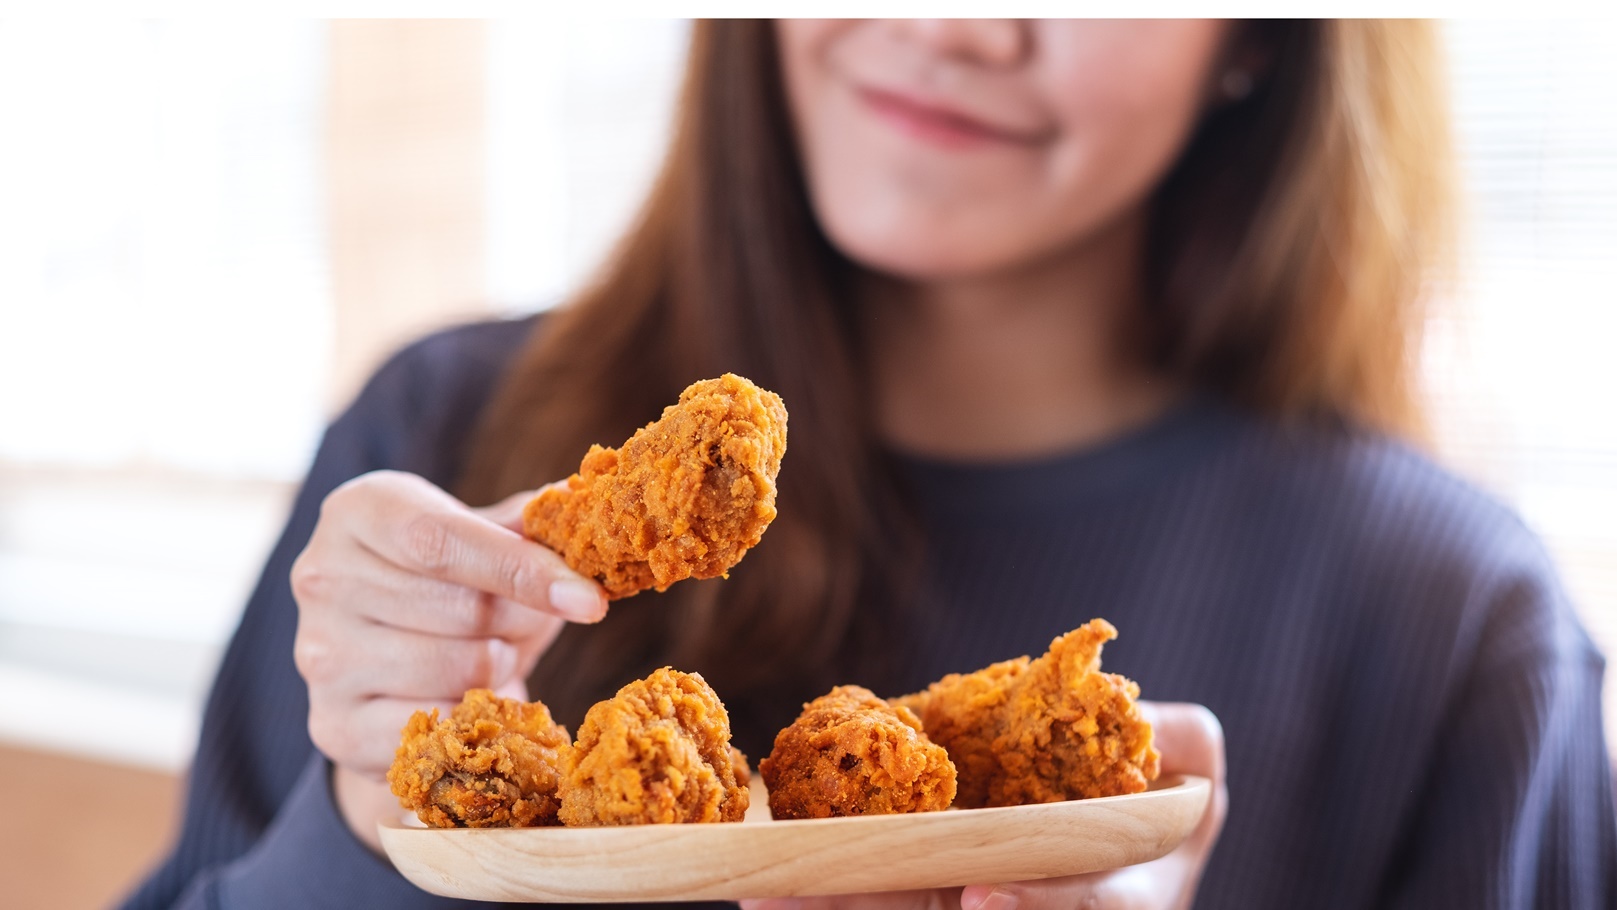 a-young-woman-holding-and-eating-fried-chicken-in-2022-01-28-10-42-07-utc